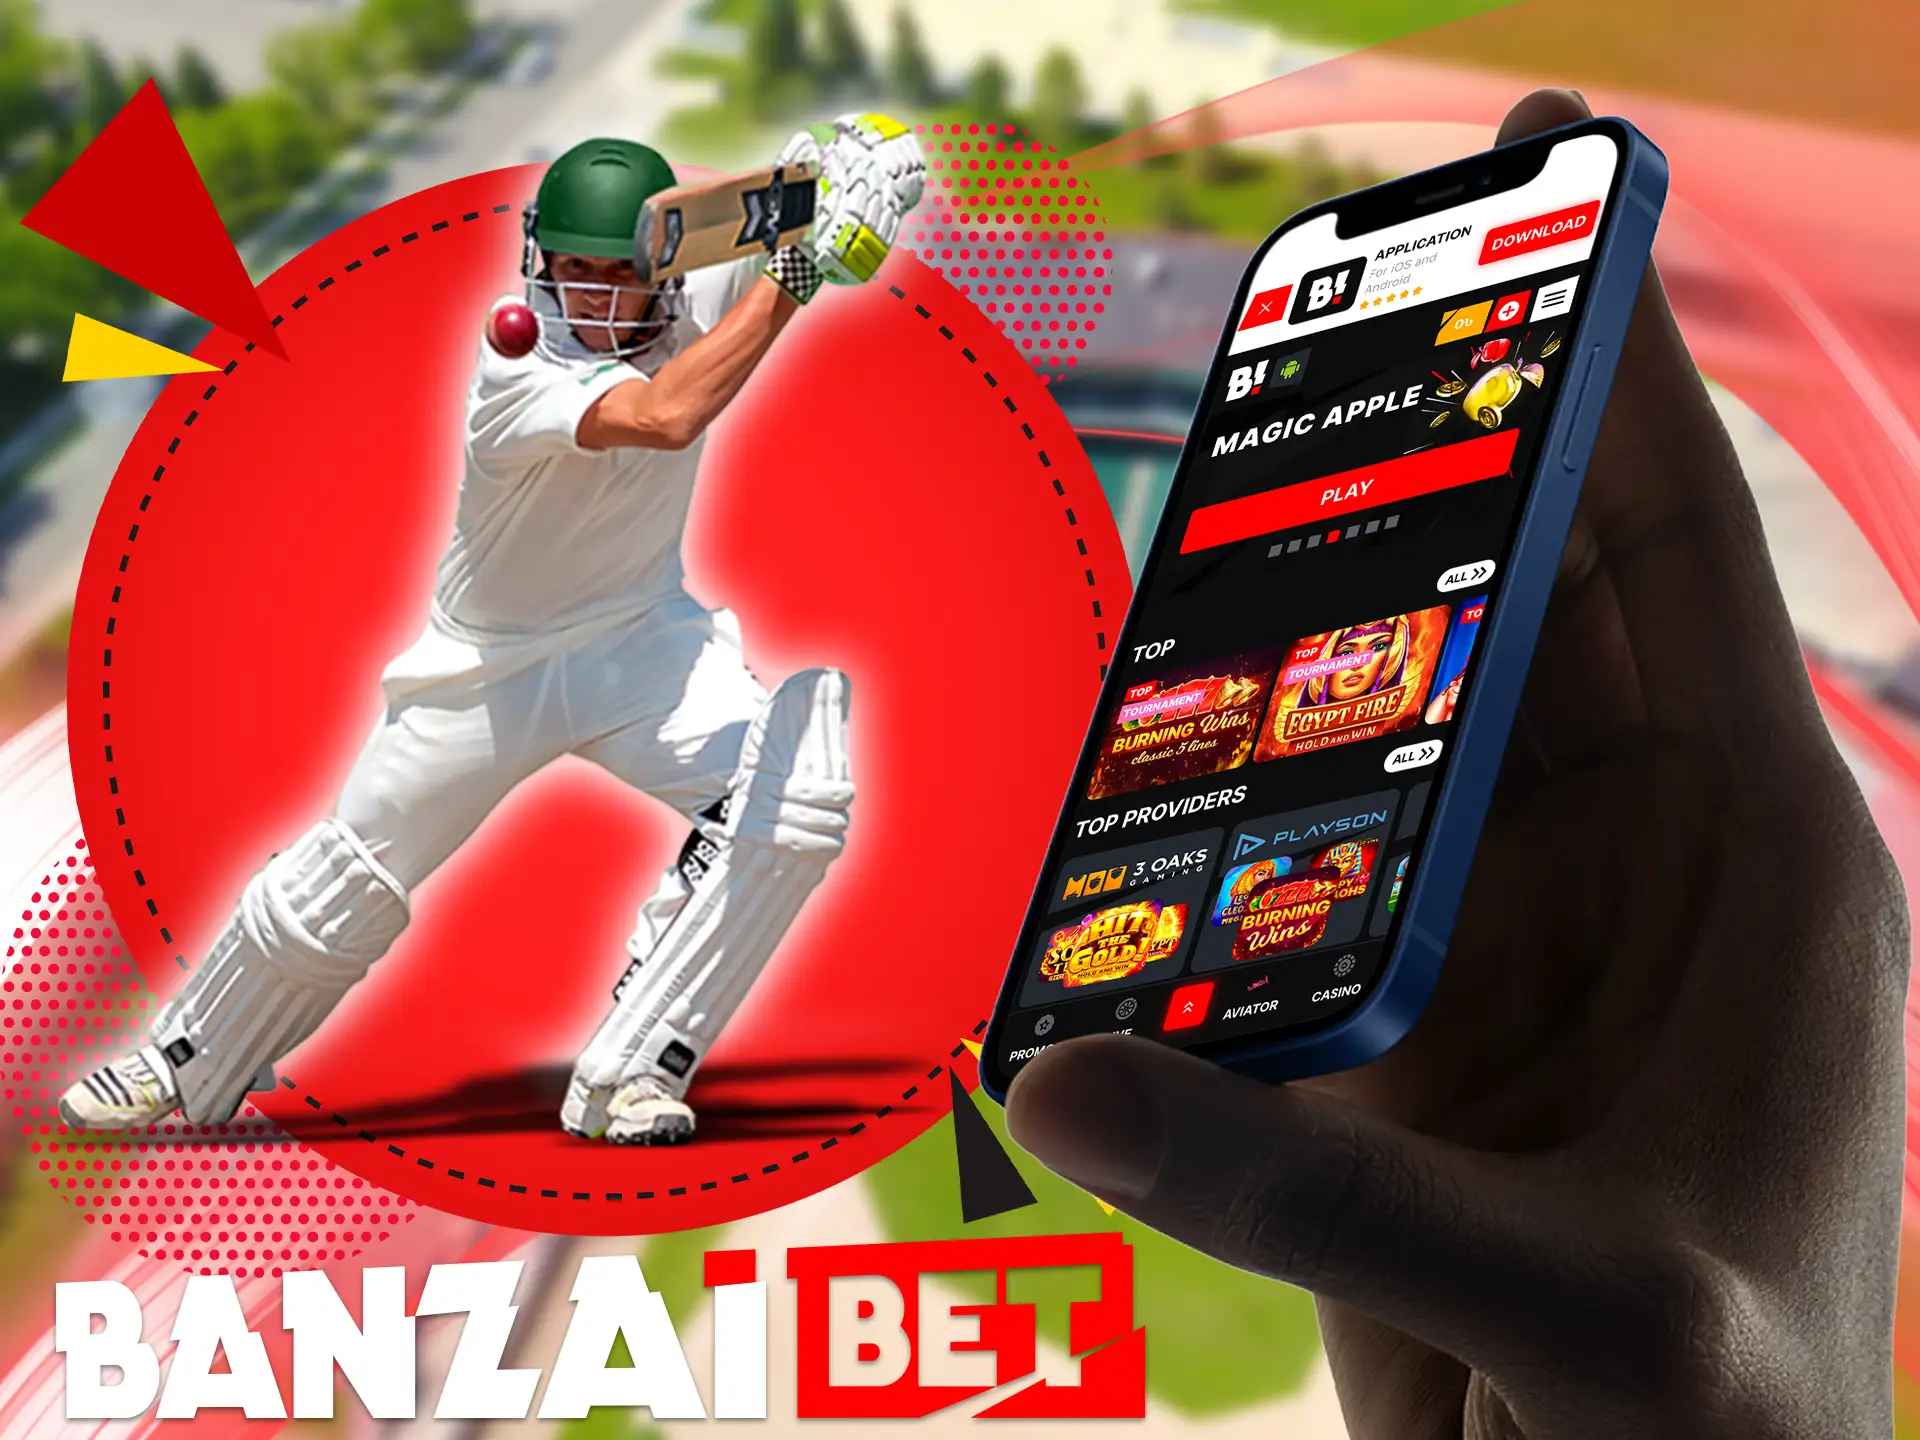 Cricket betting is incredibly popular in Bangladesh, you can place them in real time and get high odds on Banzai Bet.